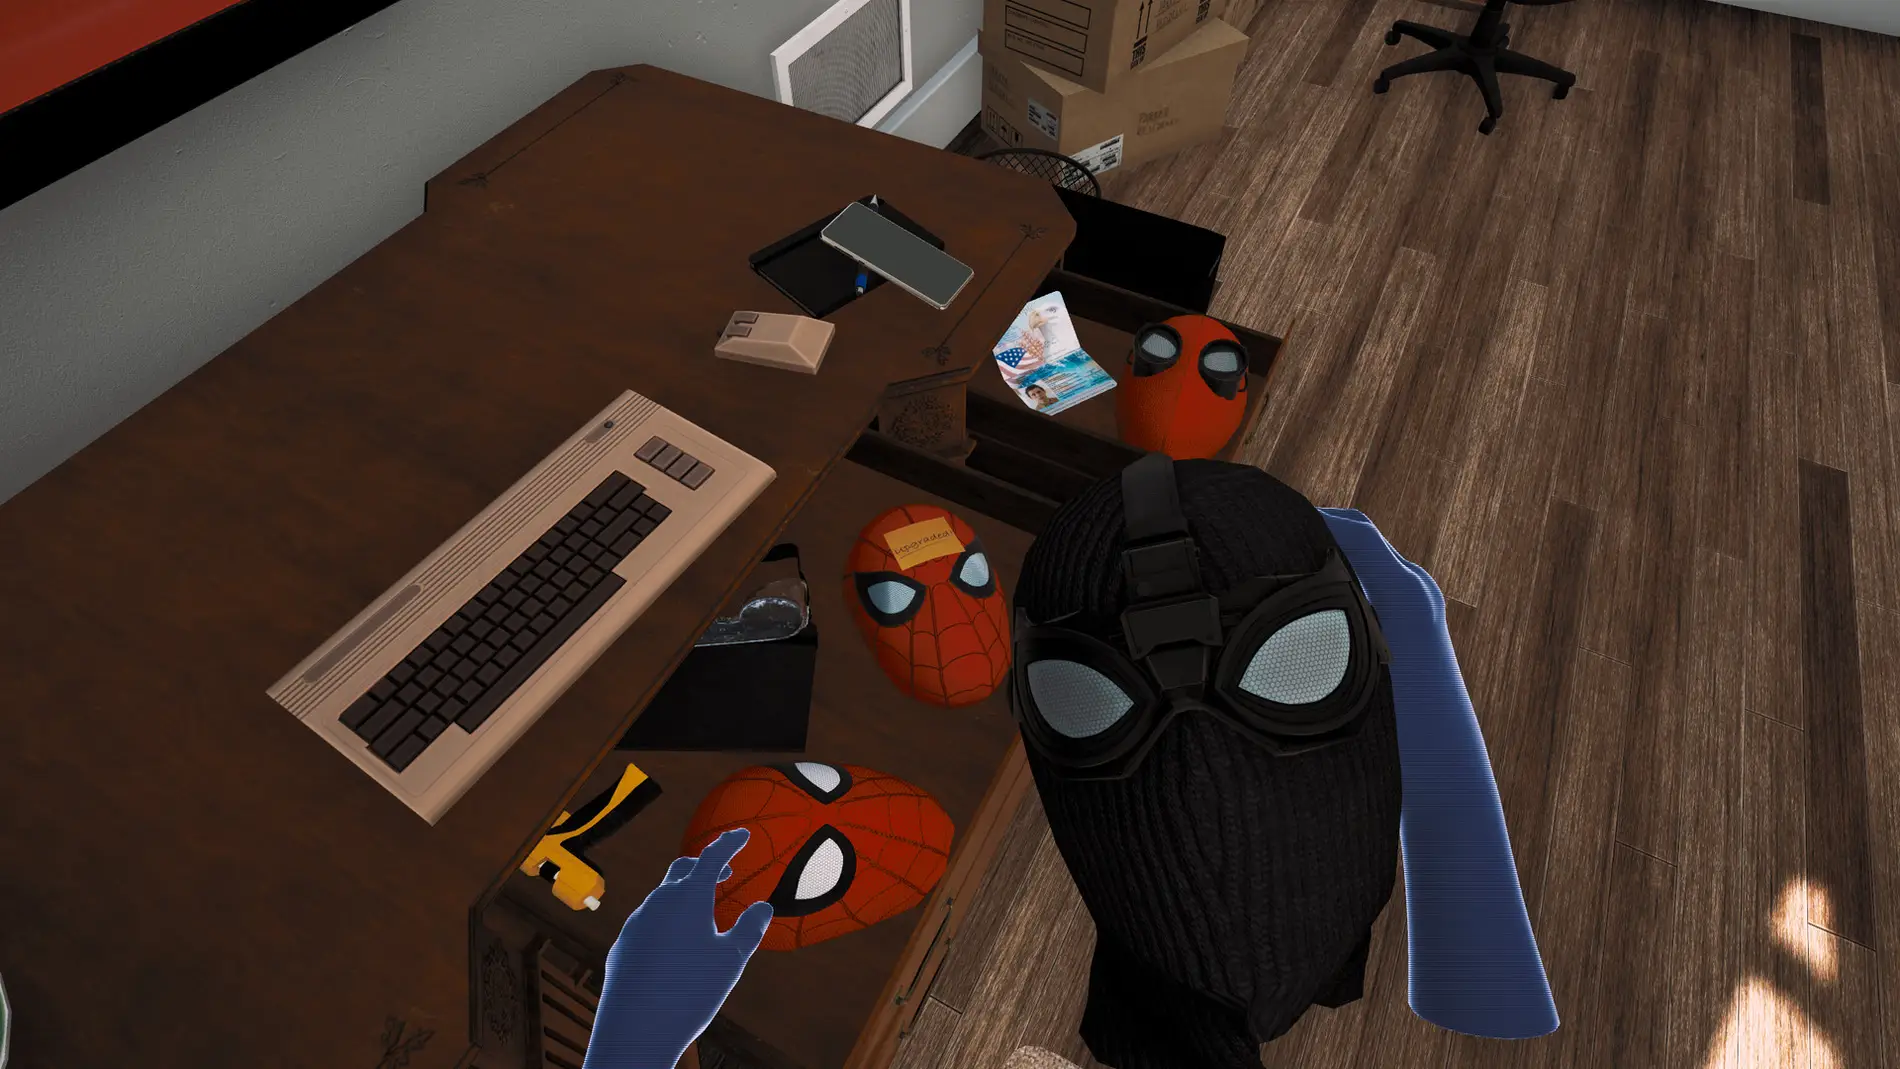 Spider-Man: Far From Home Virtual Reality